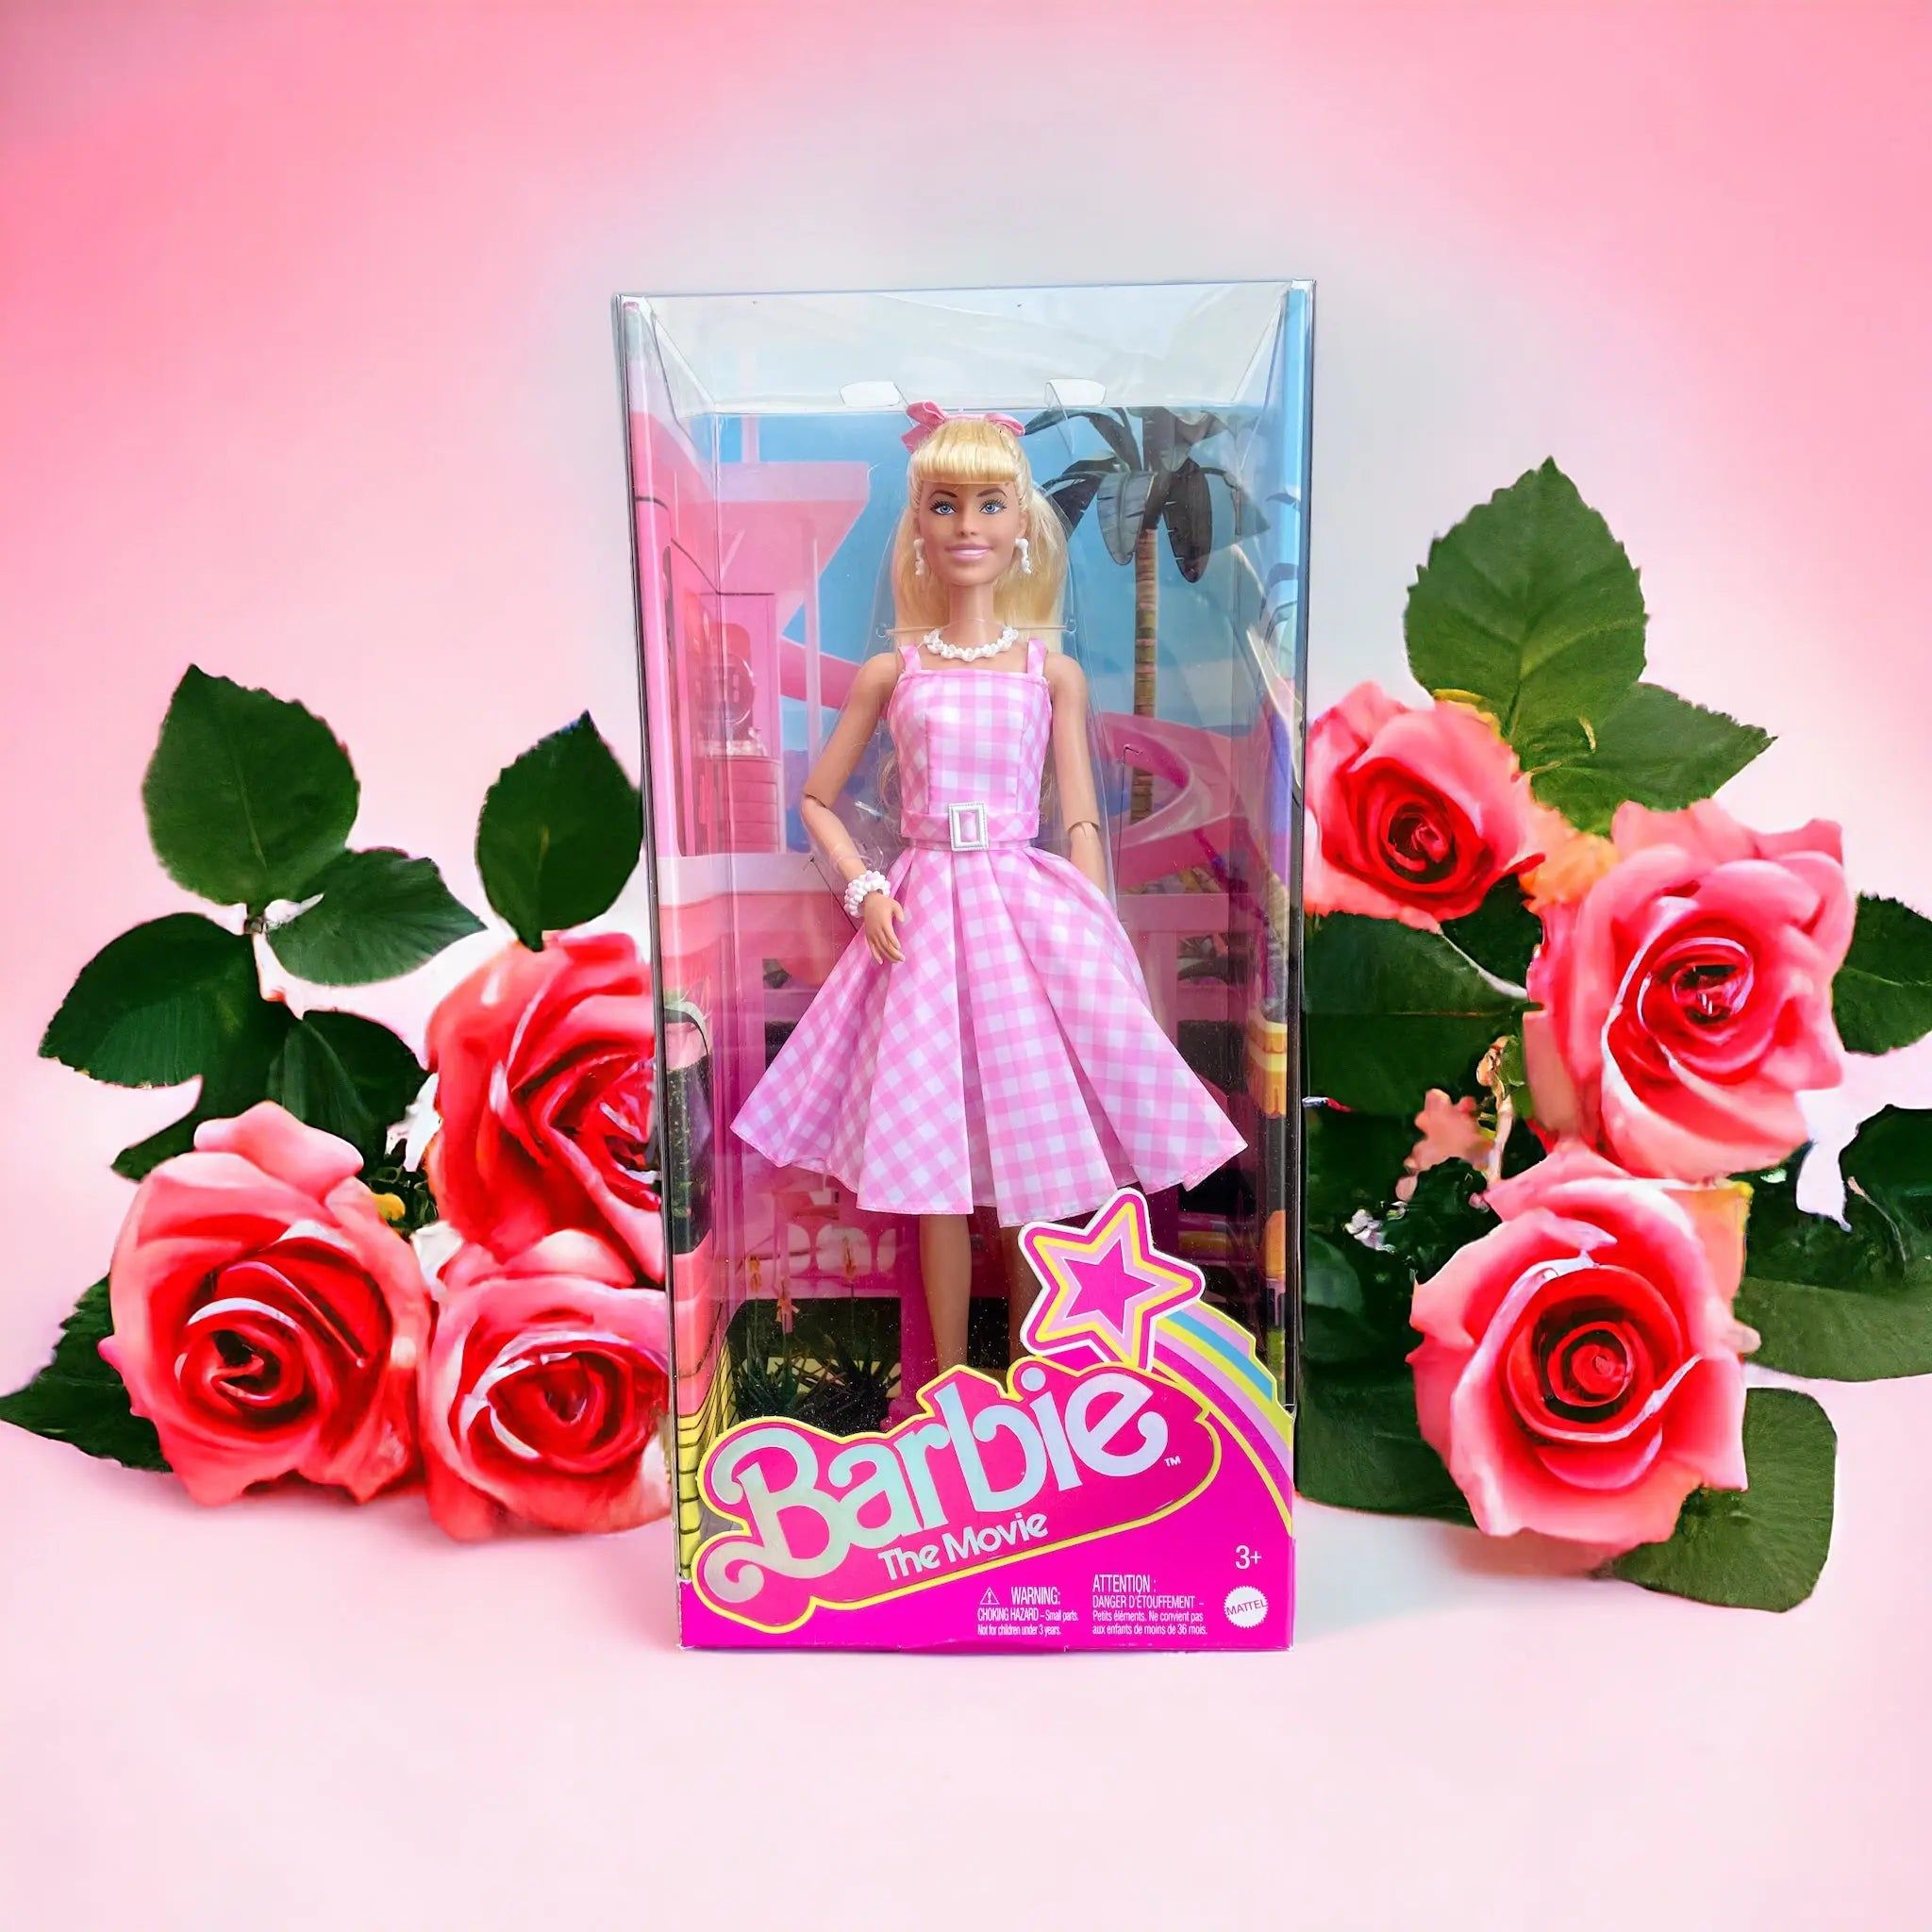 clearance discounted Barbie the Movie Collectible Doll Margot Robbie in  Pink Gingham Dress